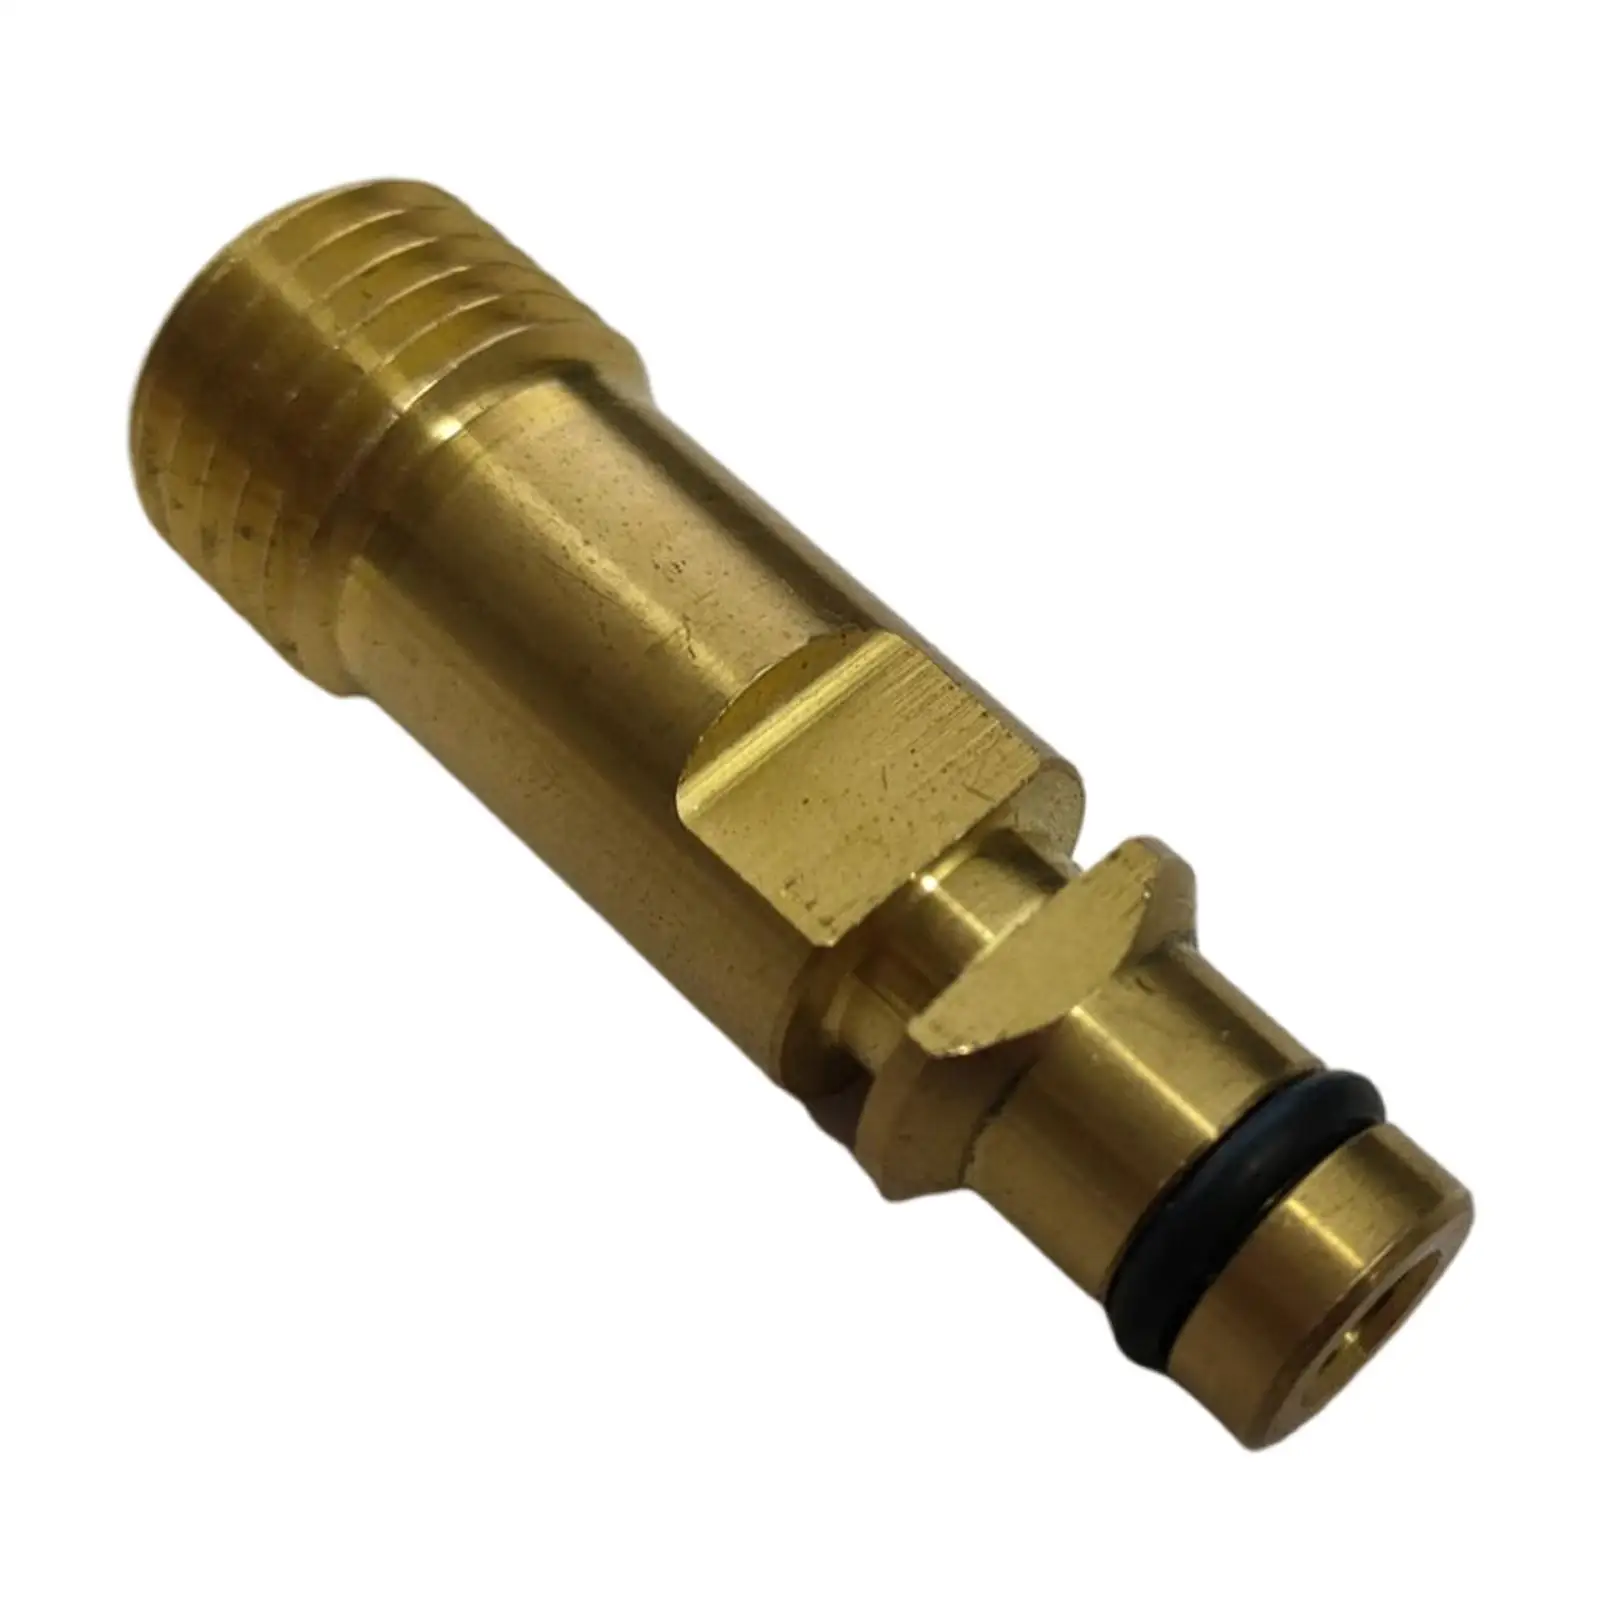 M22*1.5 Pressure Washer Quick Connector Adaptor Durable for Washing Machine